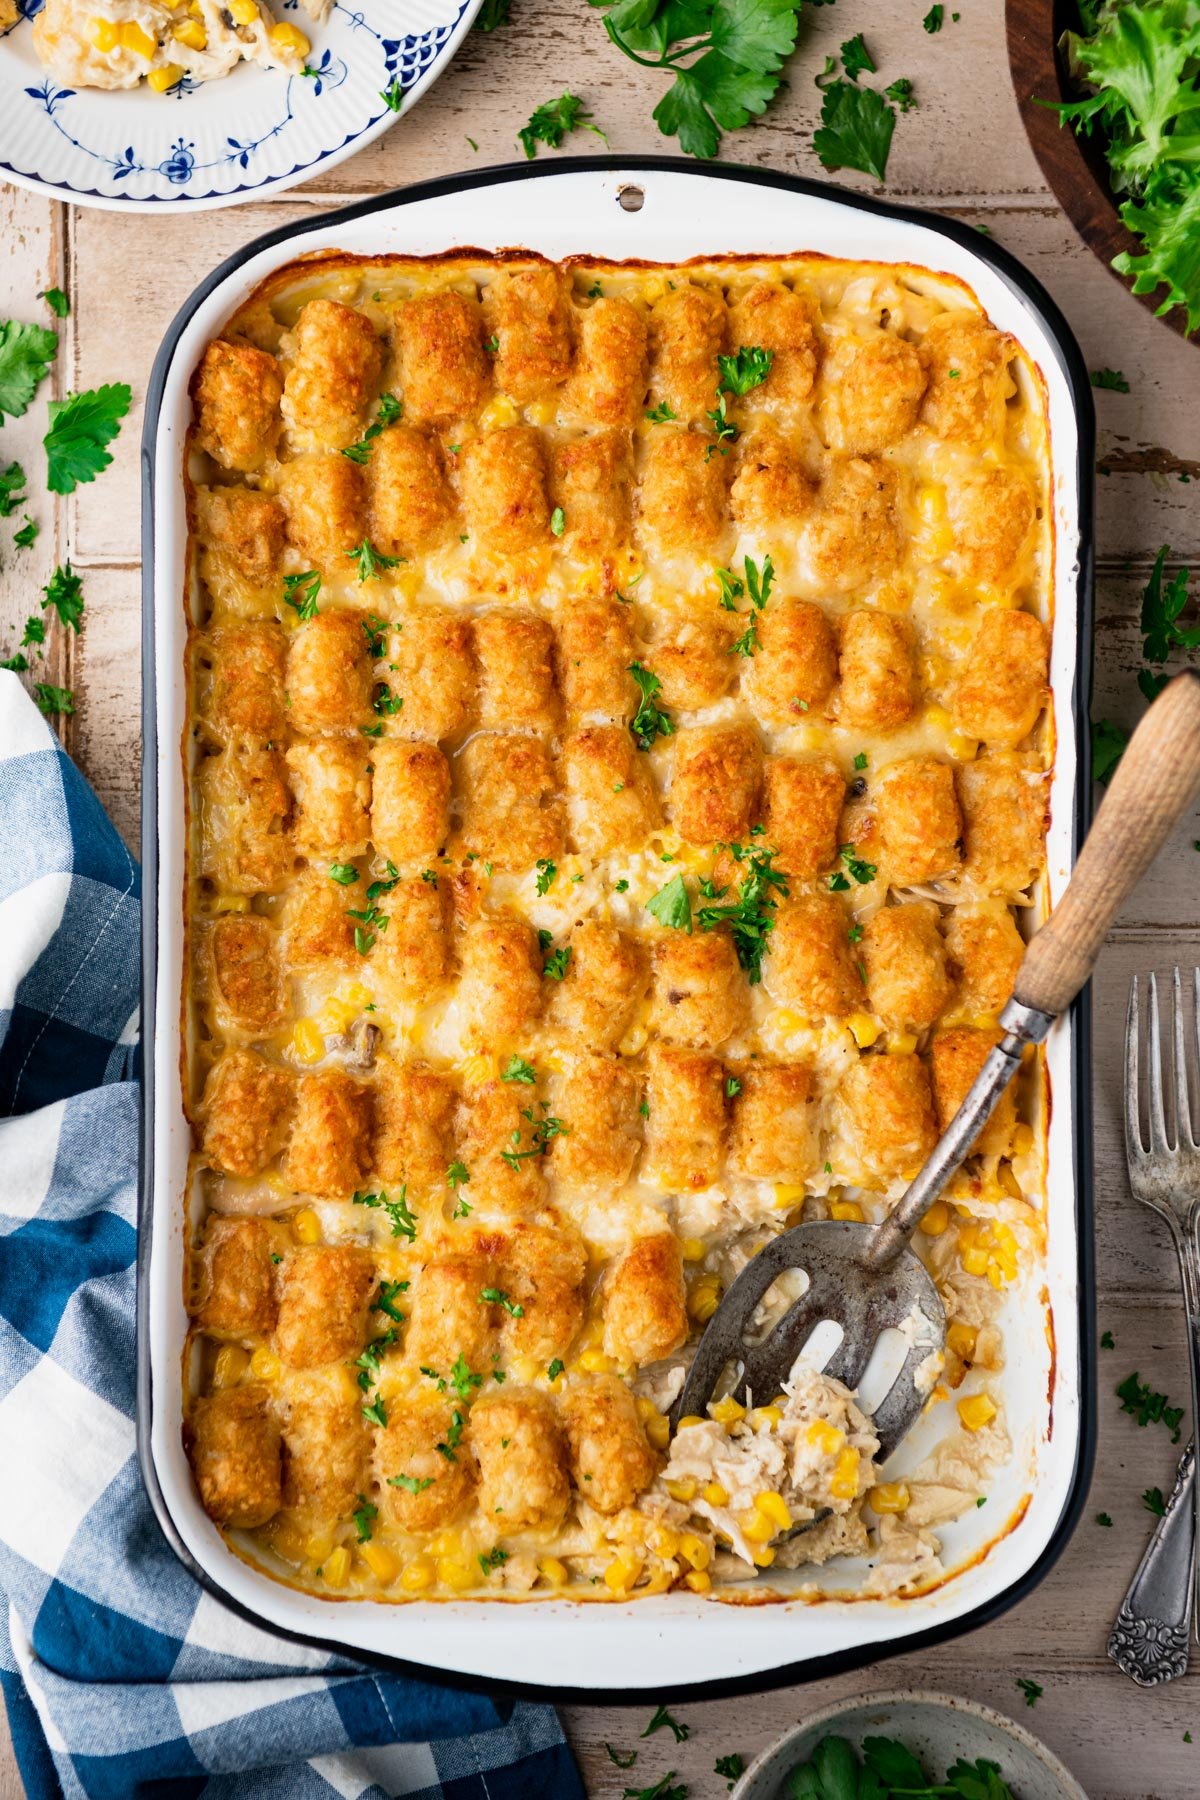 Chicken tater tot casserole on a wooden table with a side salad